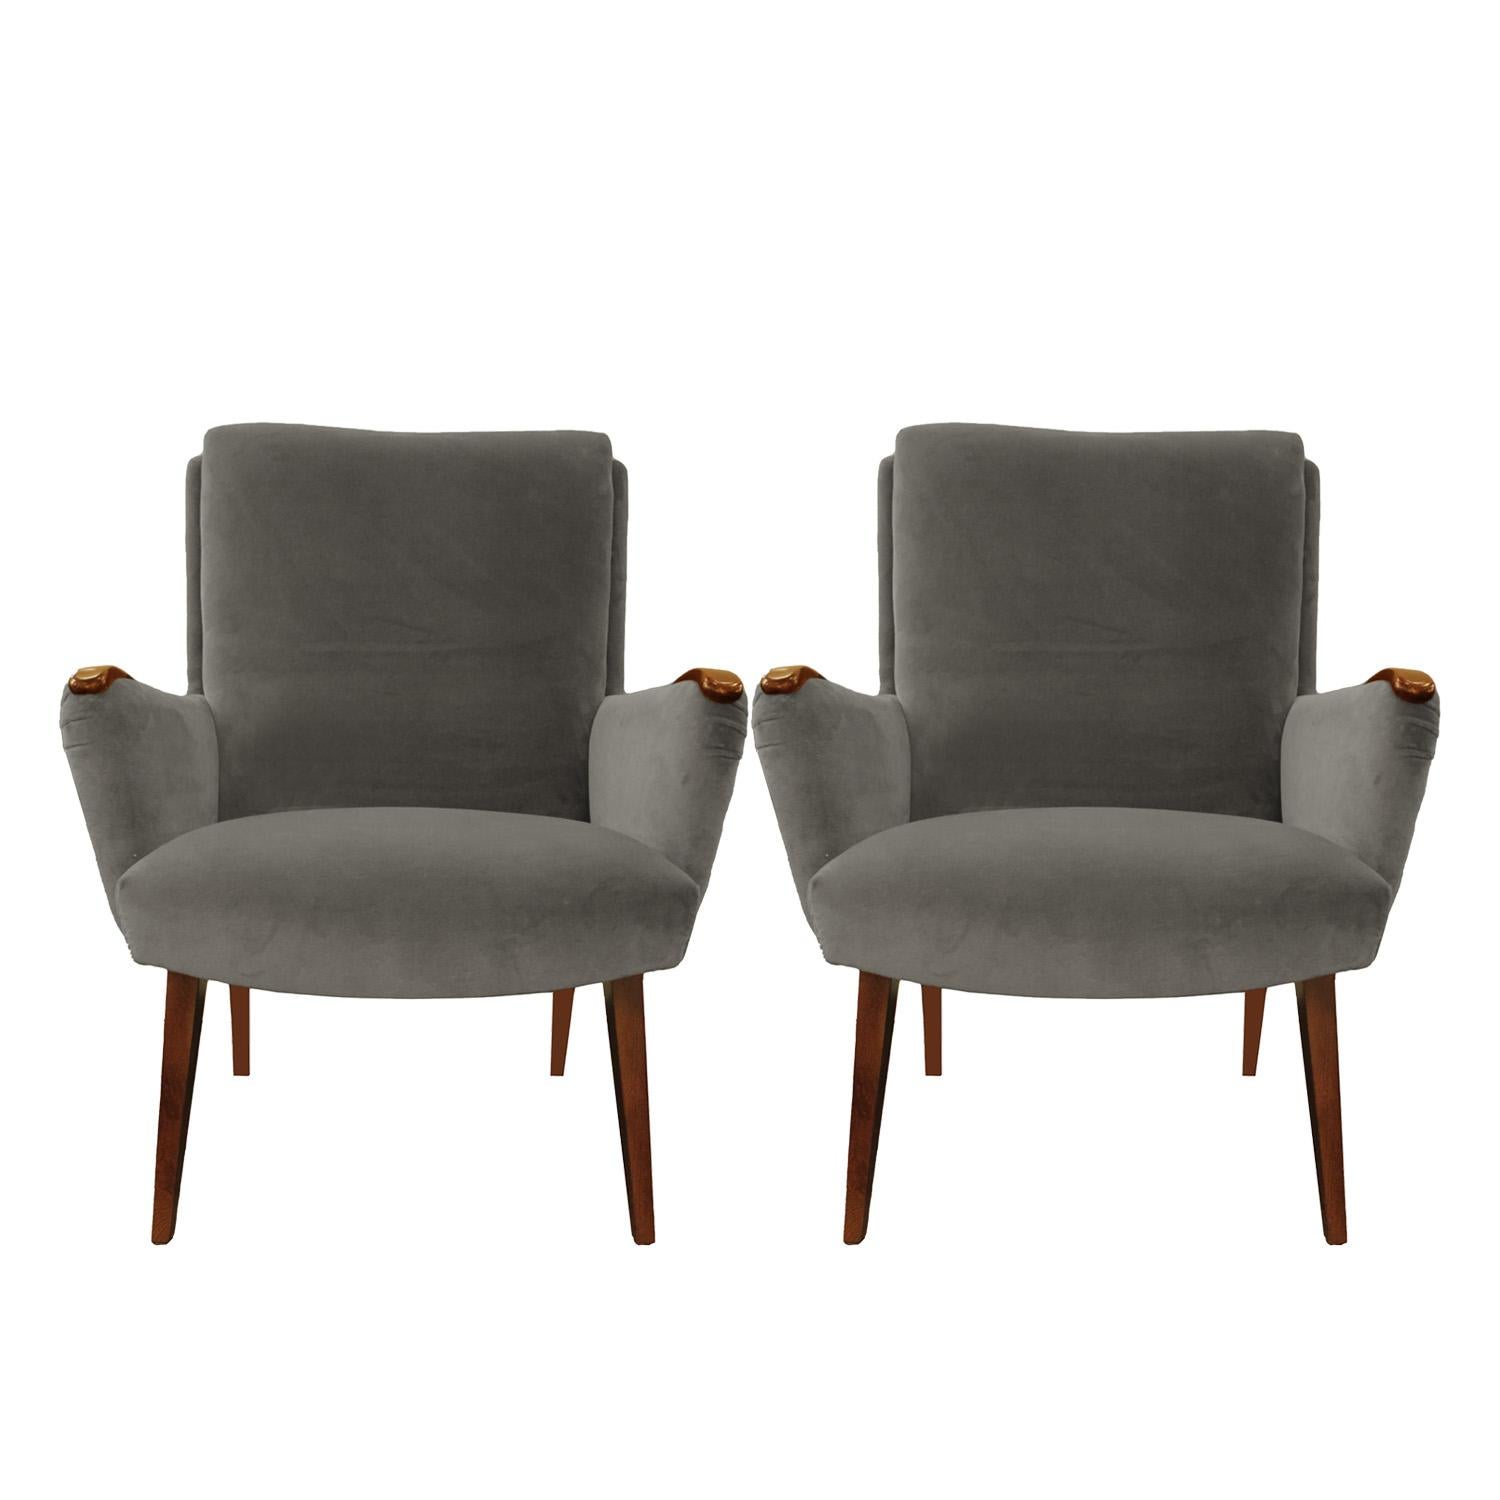 Pair of stylish, petite lounge chairs with wallnut arm pads and legs. Recently covered in gray Holly Hunt high performance velvet. Italian, 1950s.